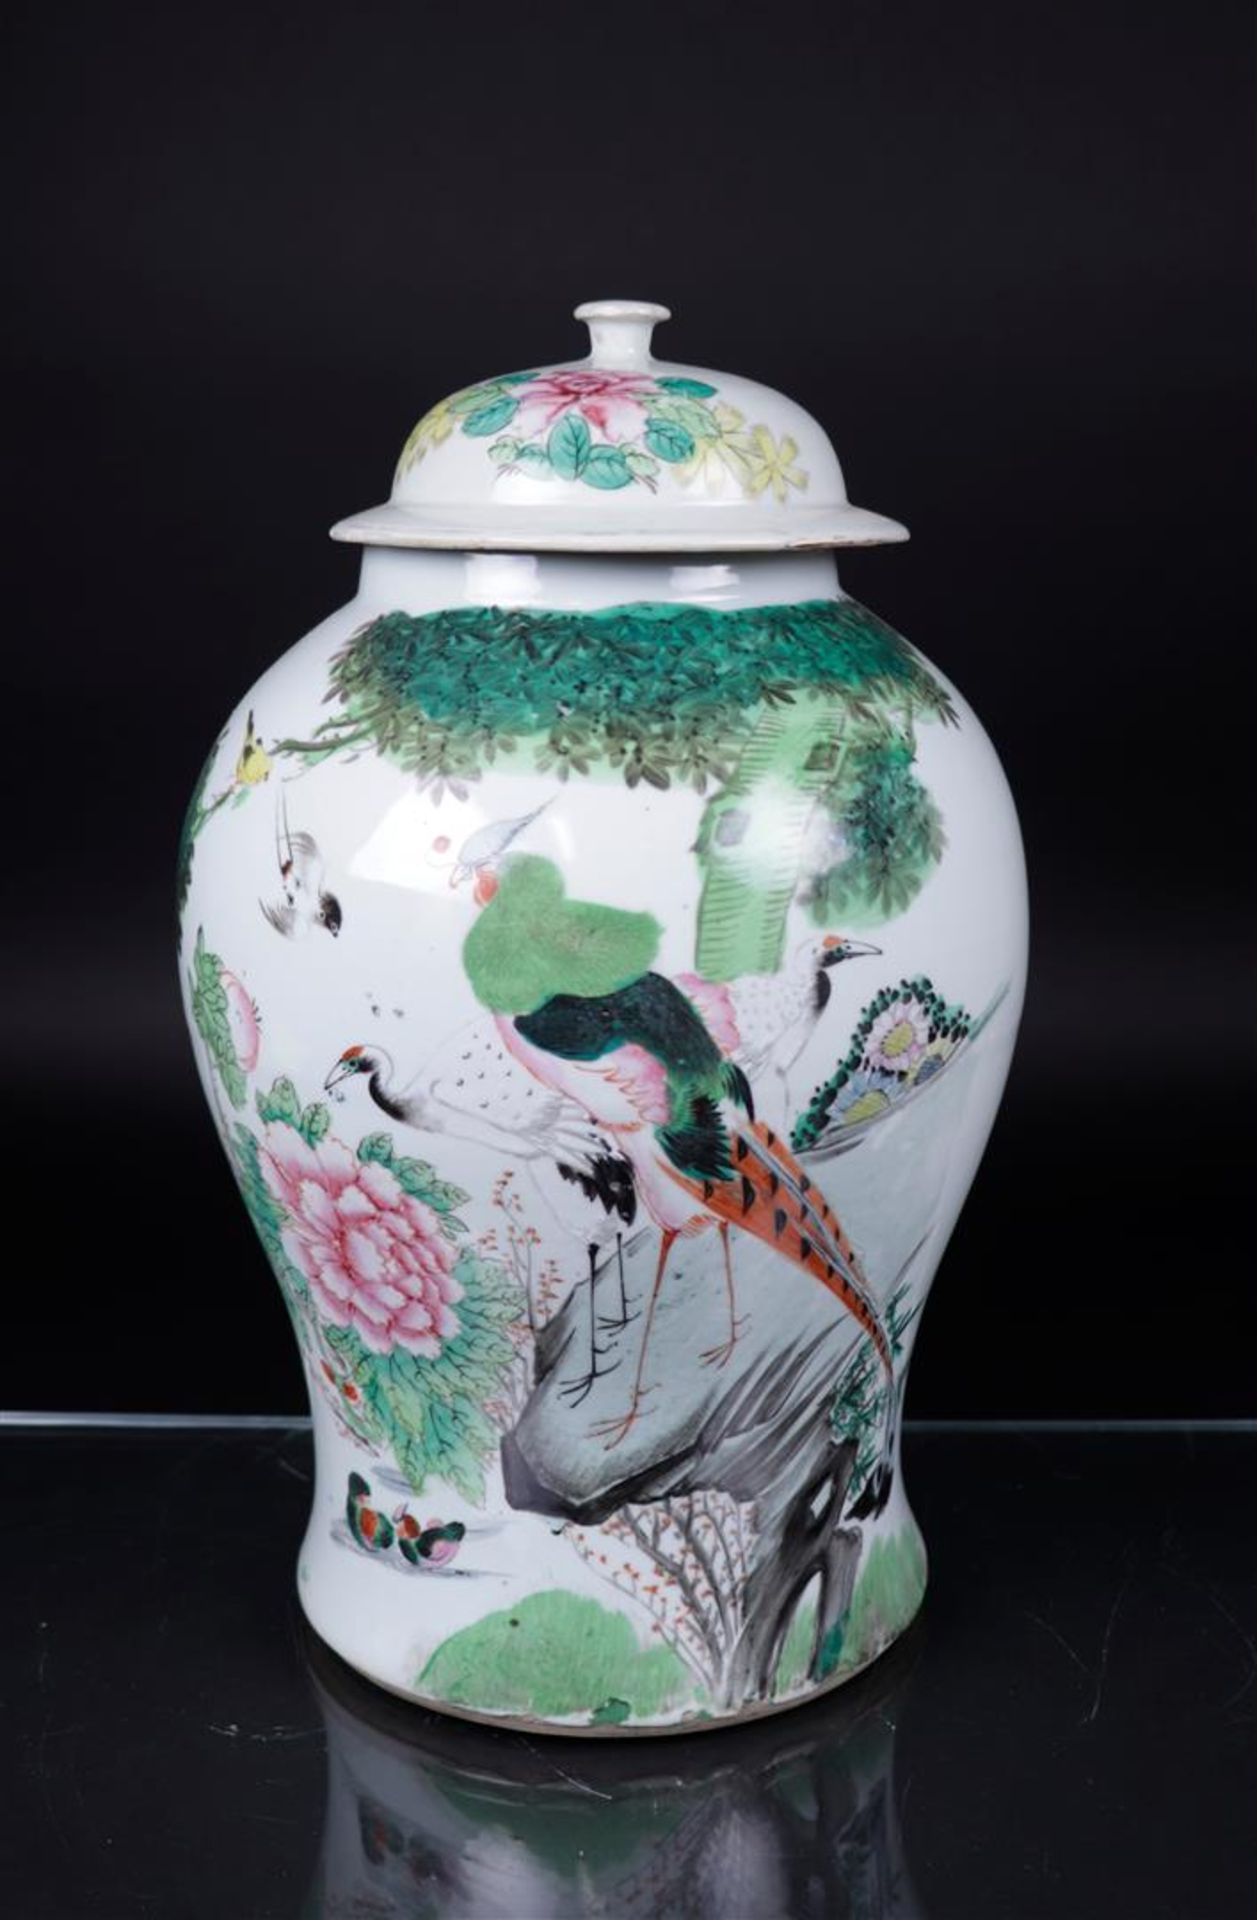 A porcelain Famille rose lidded vase decorated with various Chinese characters. China, 19th century.